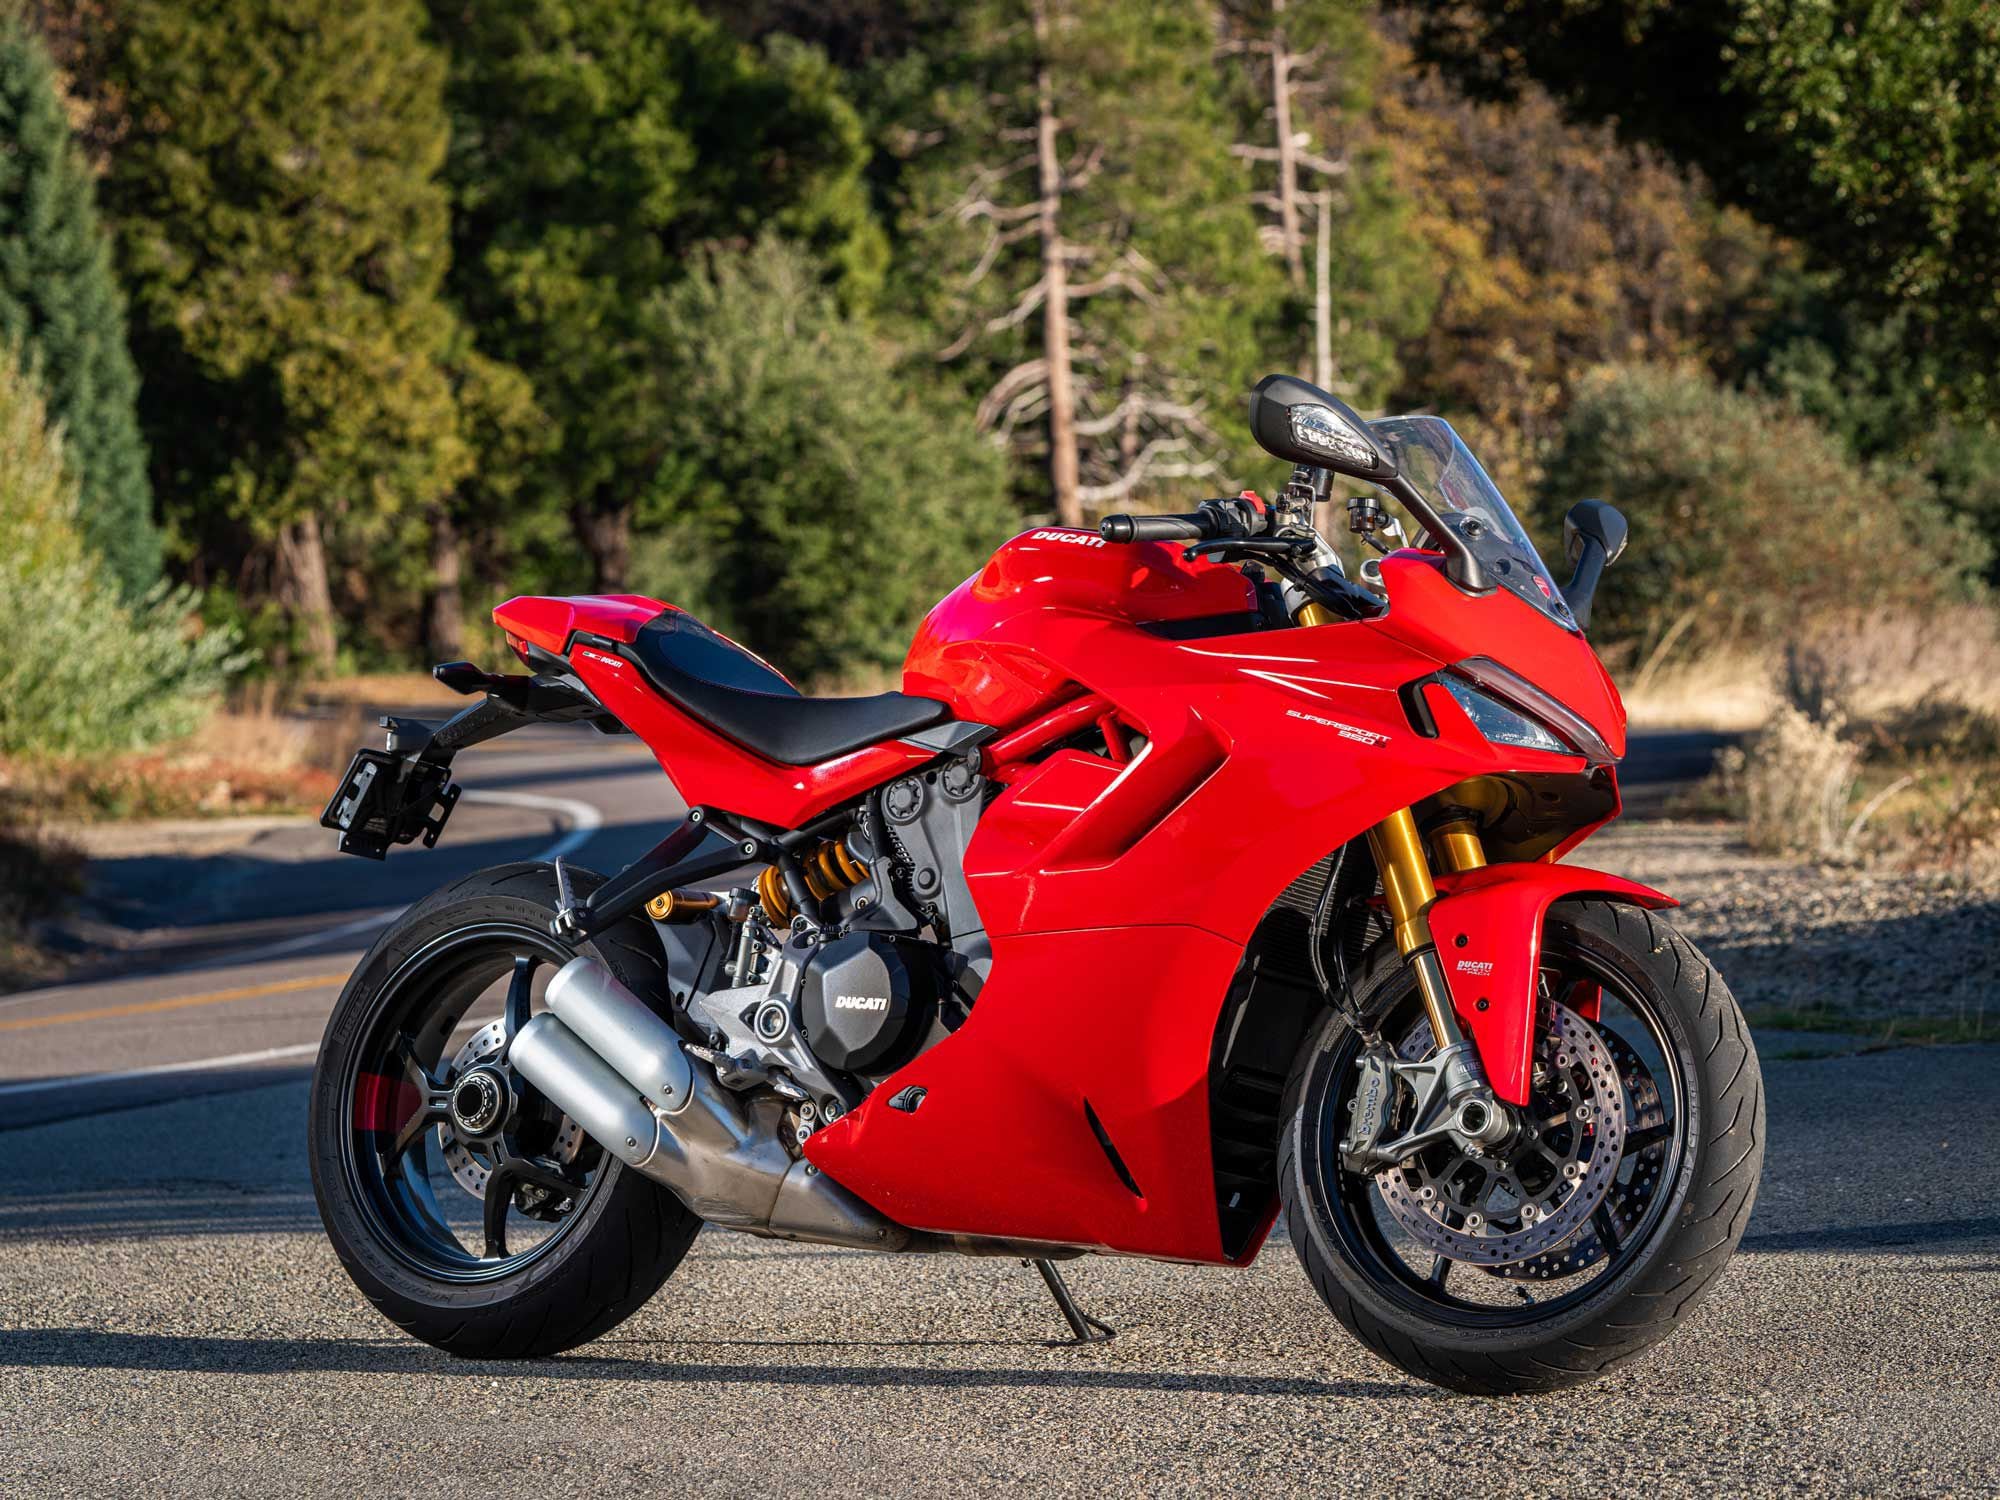 Aesthetically, it’s hard to beat the lines of the Ducati SuperSport 950 S.